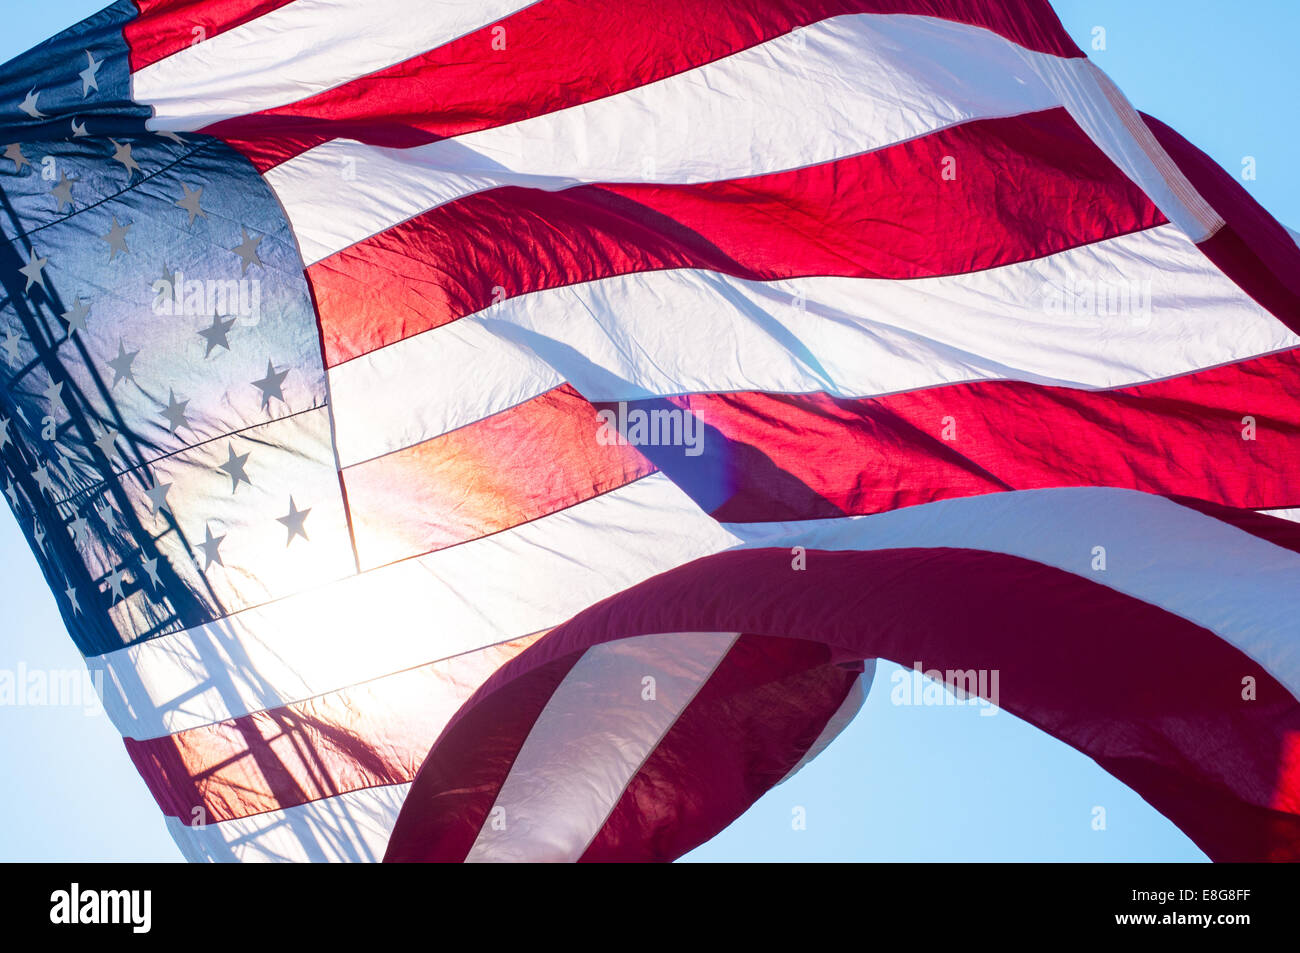 United States flag flying from a fire truck ladder in Barnstable, Massachusetts, USA. Stock Photo